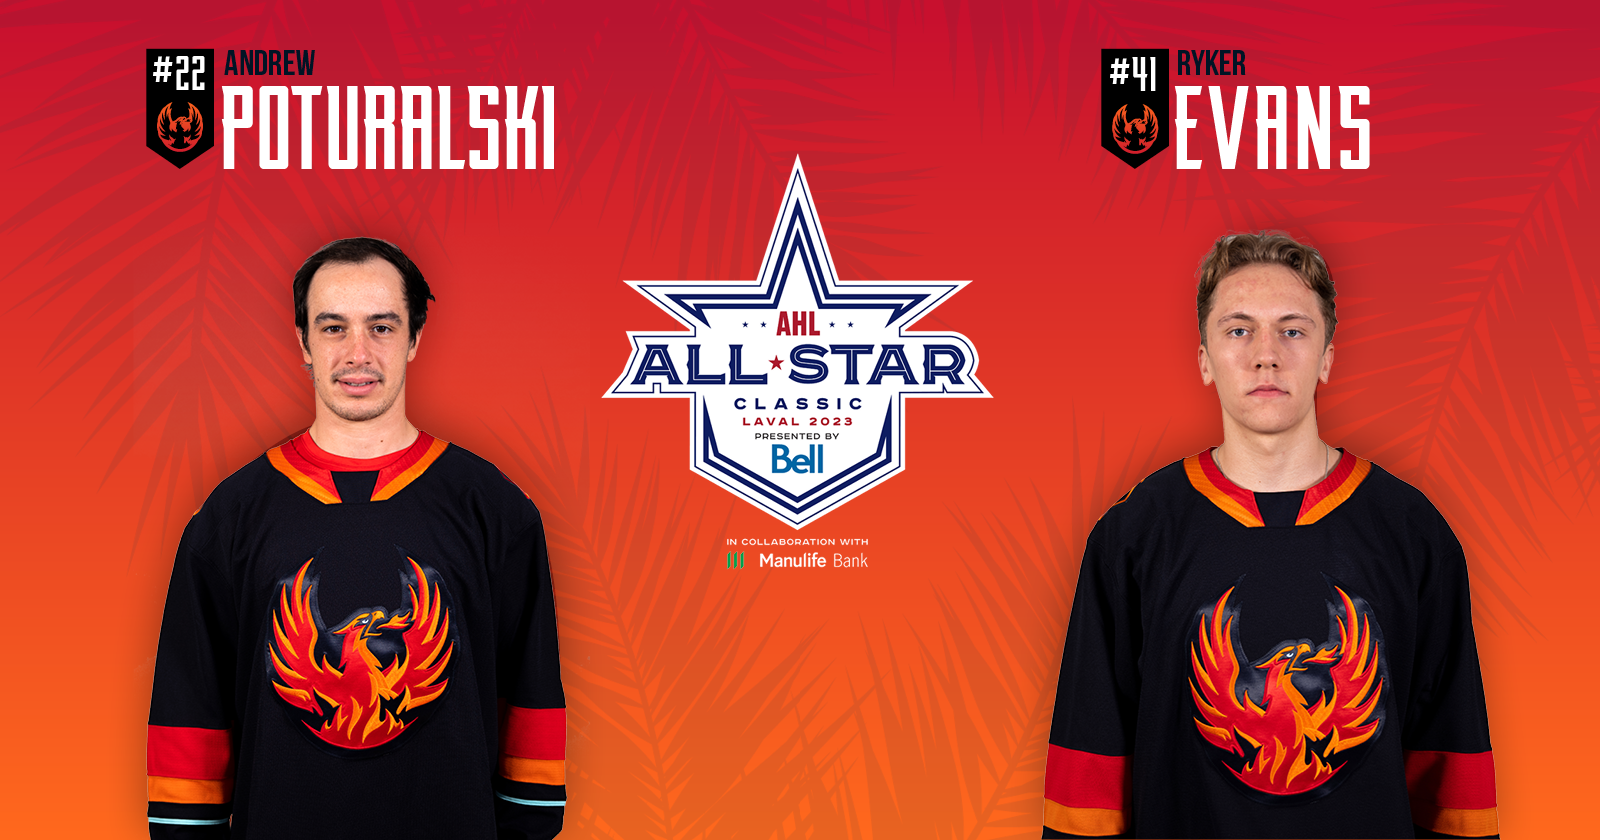 Laval to host 2021 AHL All-Star Classic